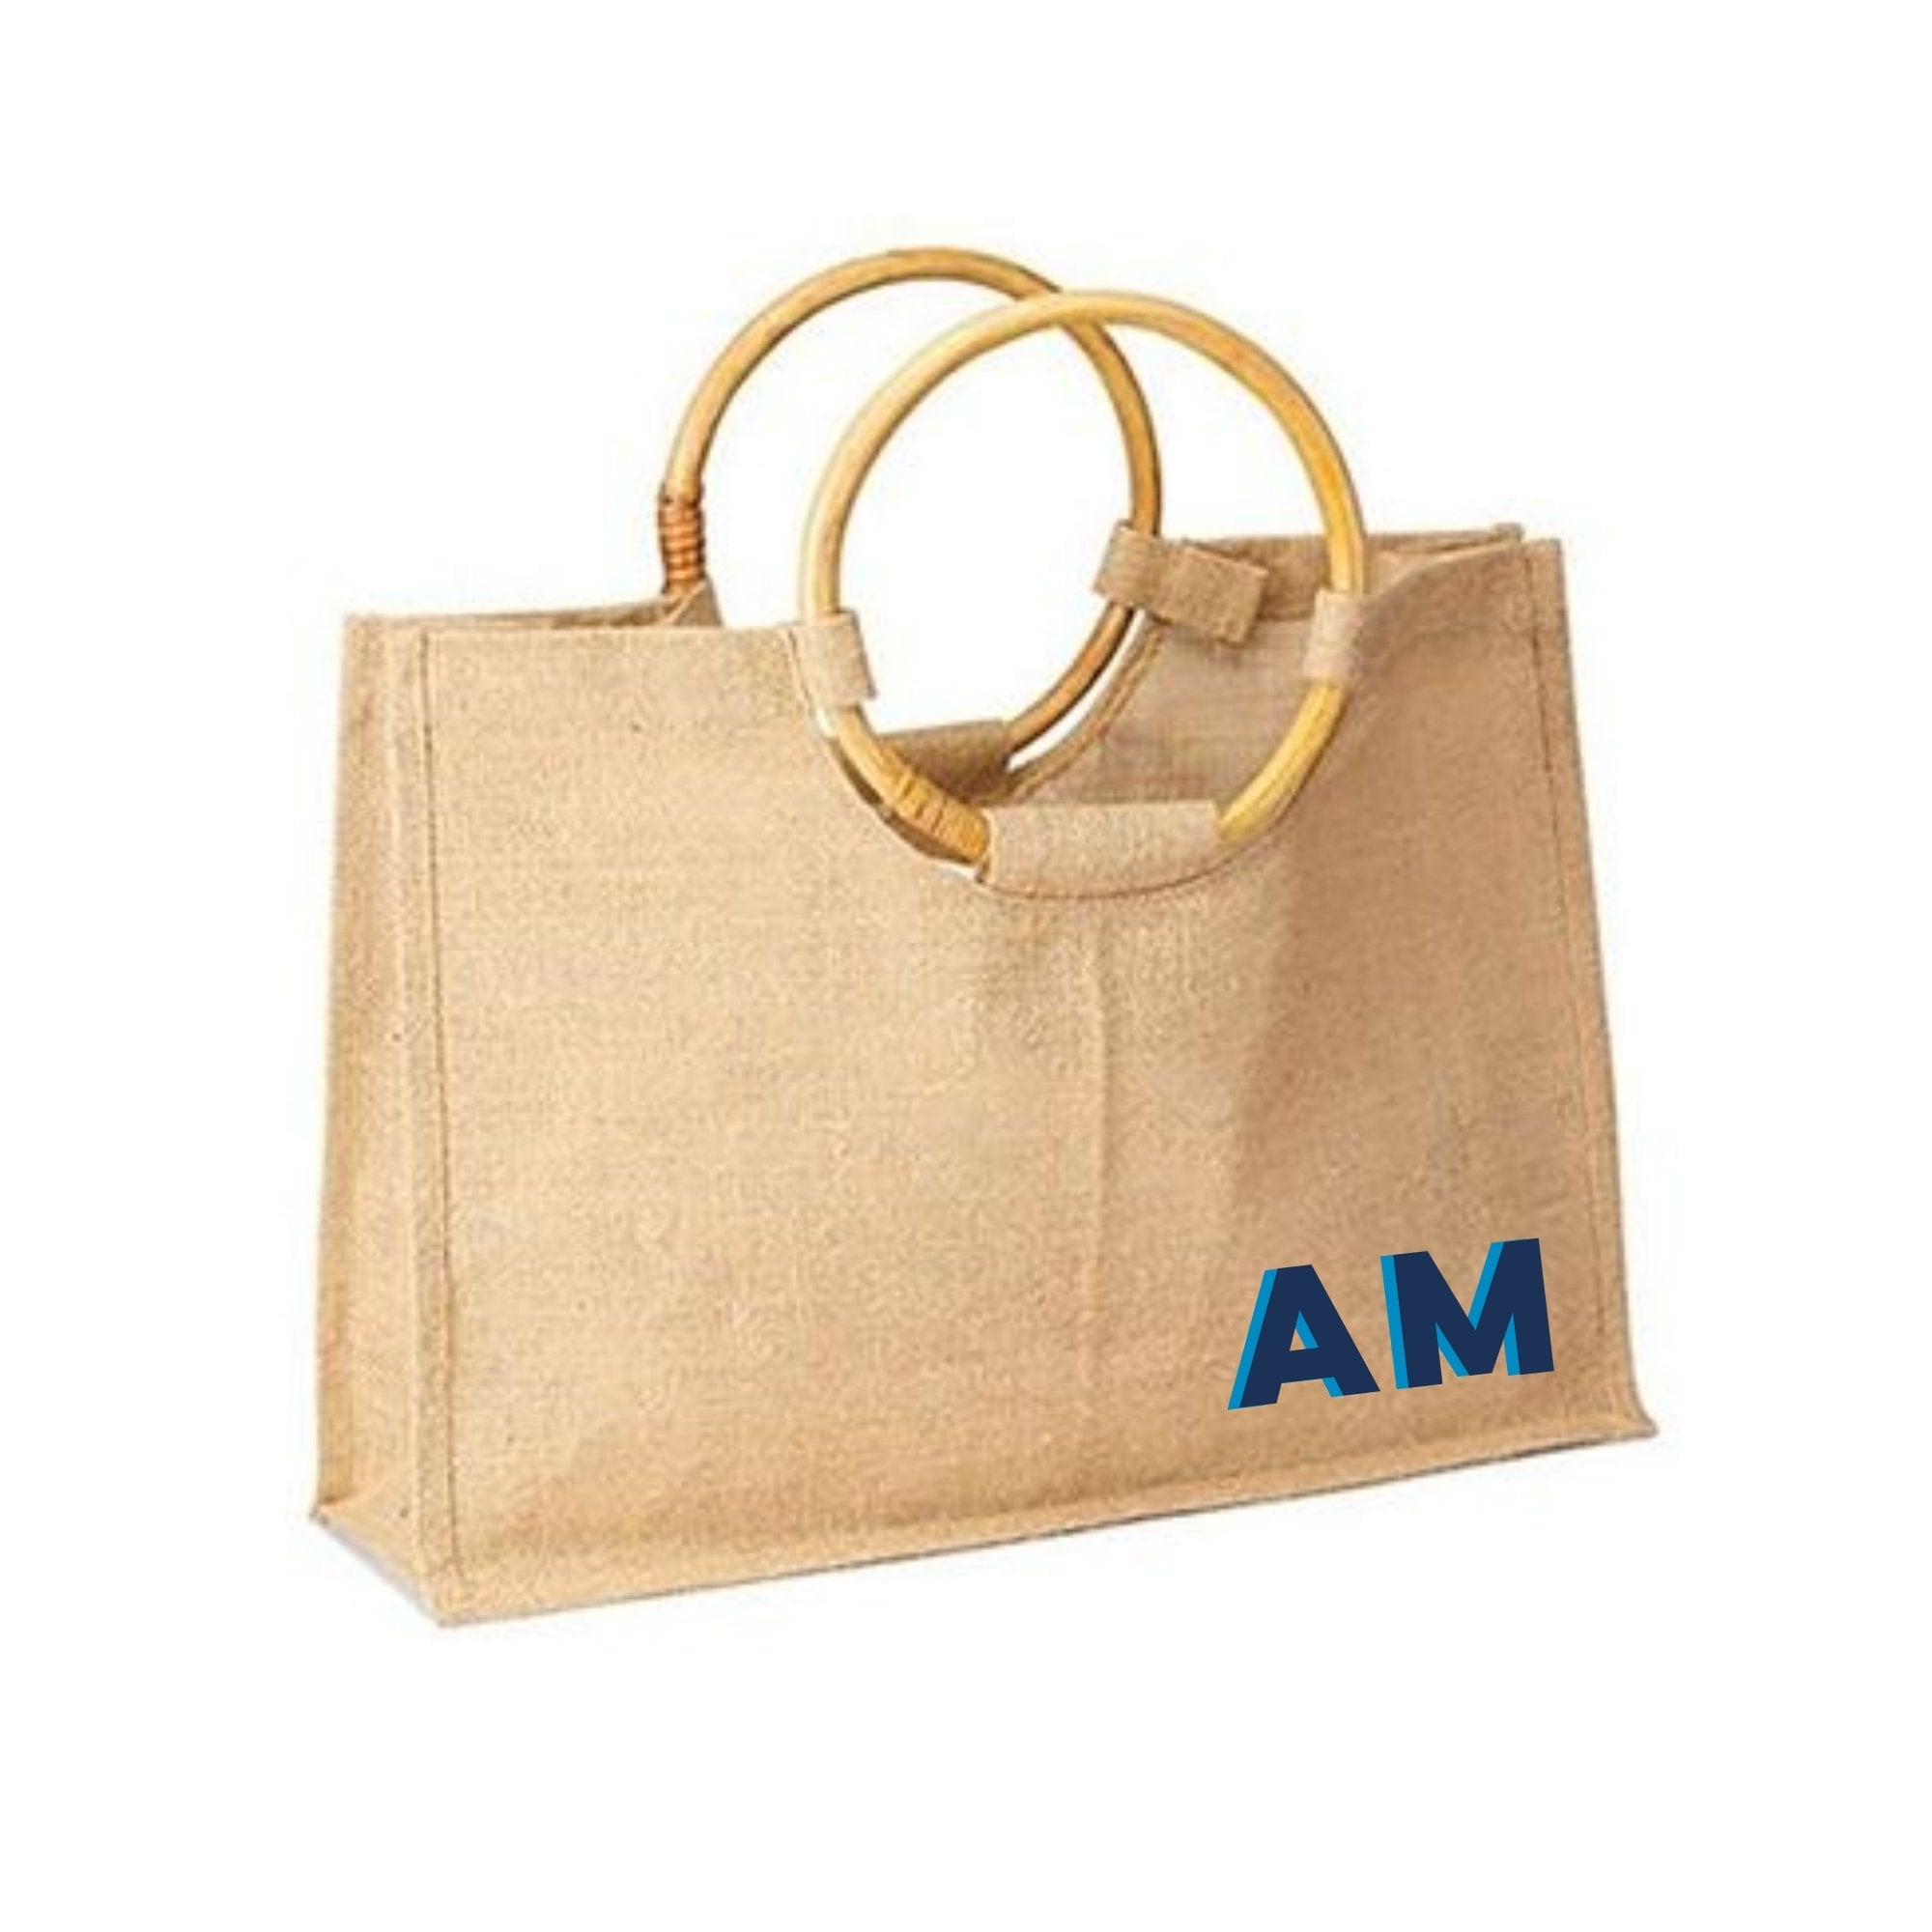 A bamboo jute is customized with a pink monogram on the bottom corner